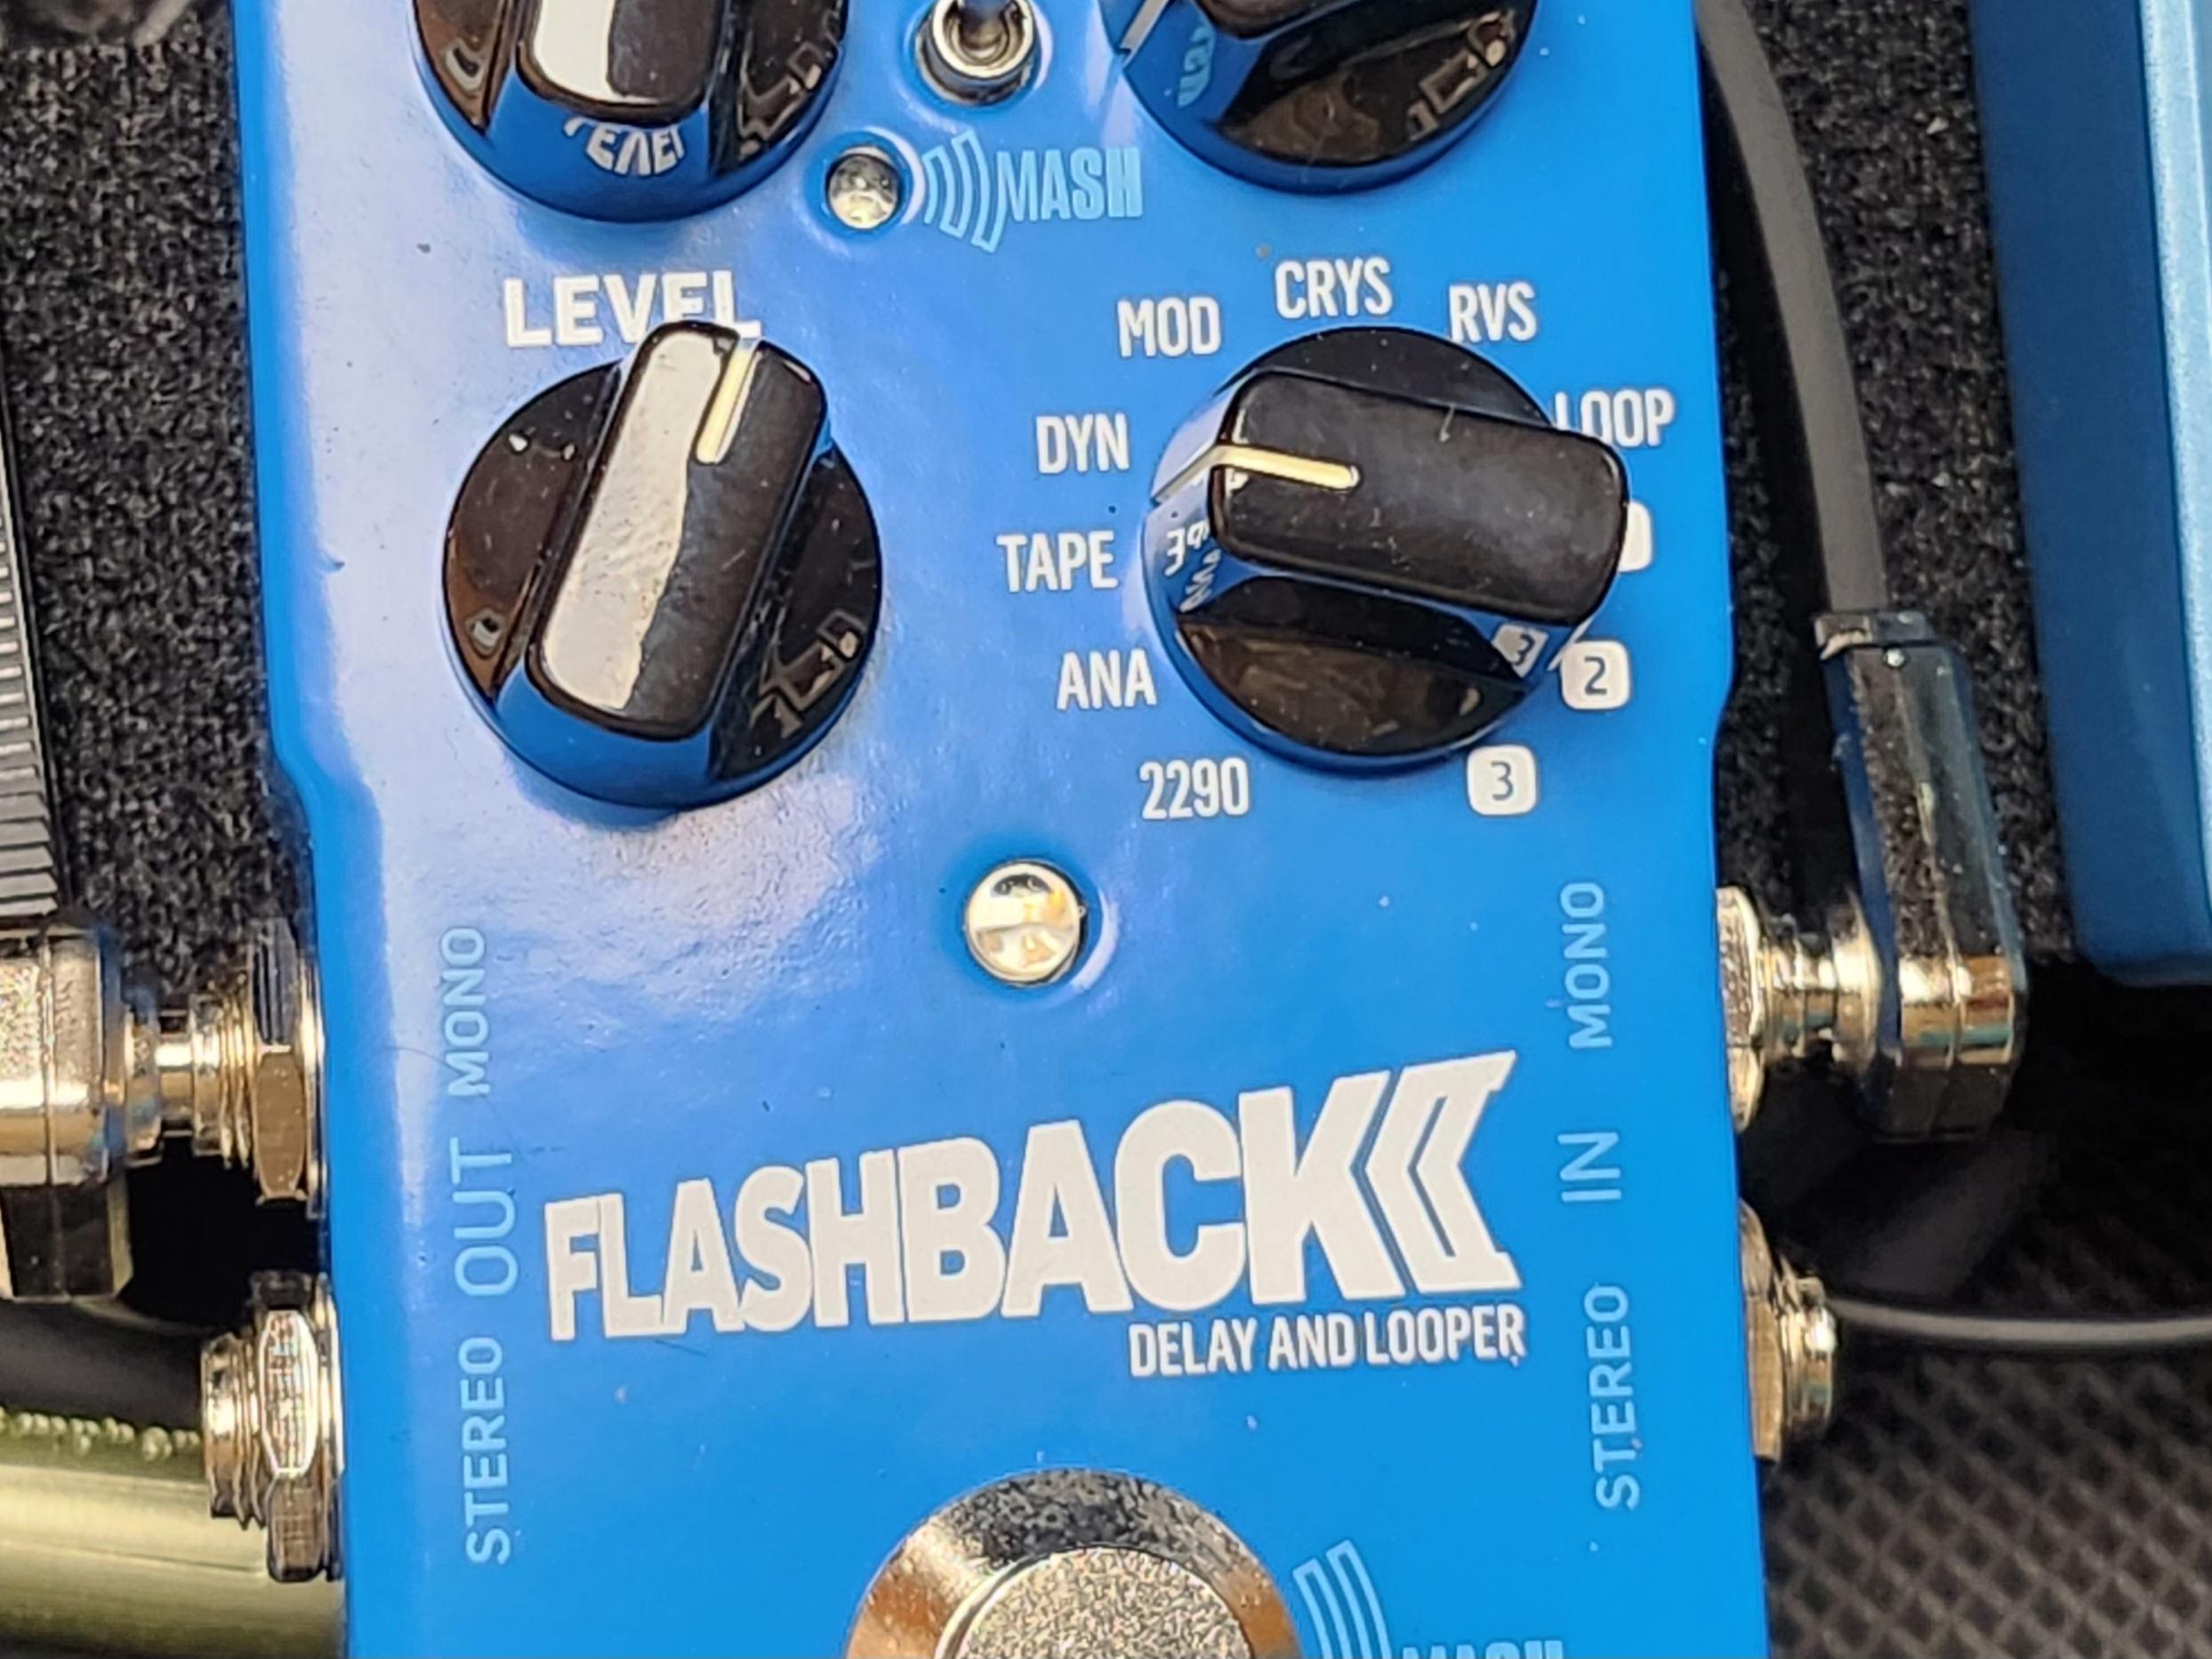 Used TC Electronic Flashback 2 Delay and   Sweetwater's Gear Exchange